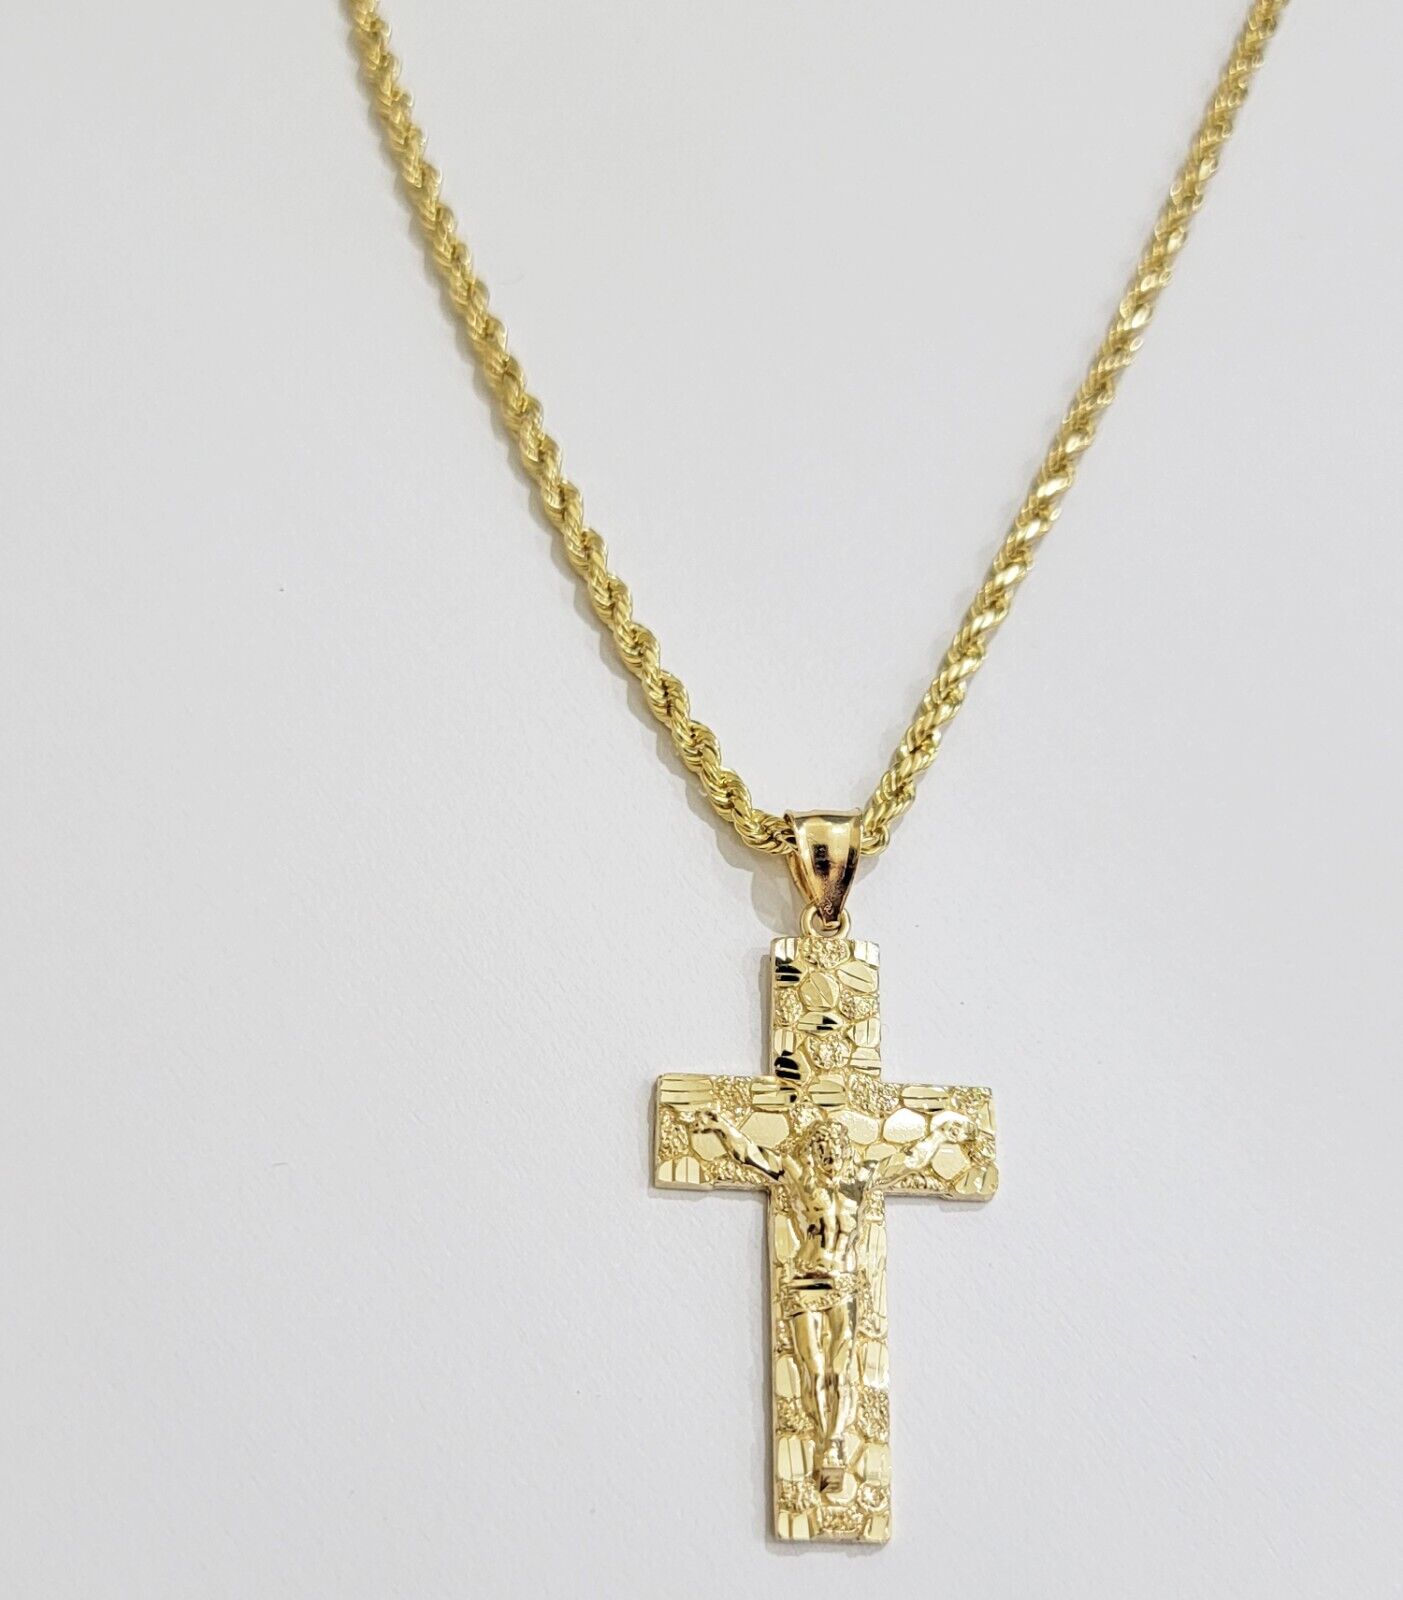 10k Yellow Gold Rope Chain Nugget Cross Charm Set 28 Inch necklace pendant, REAL